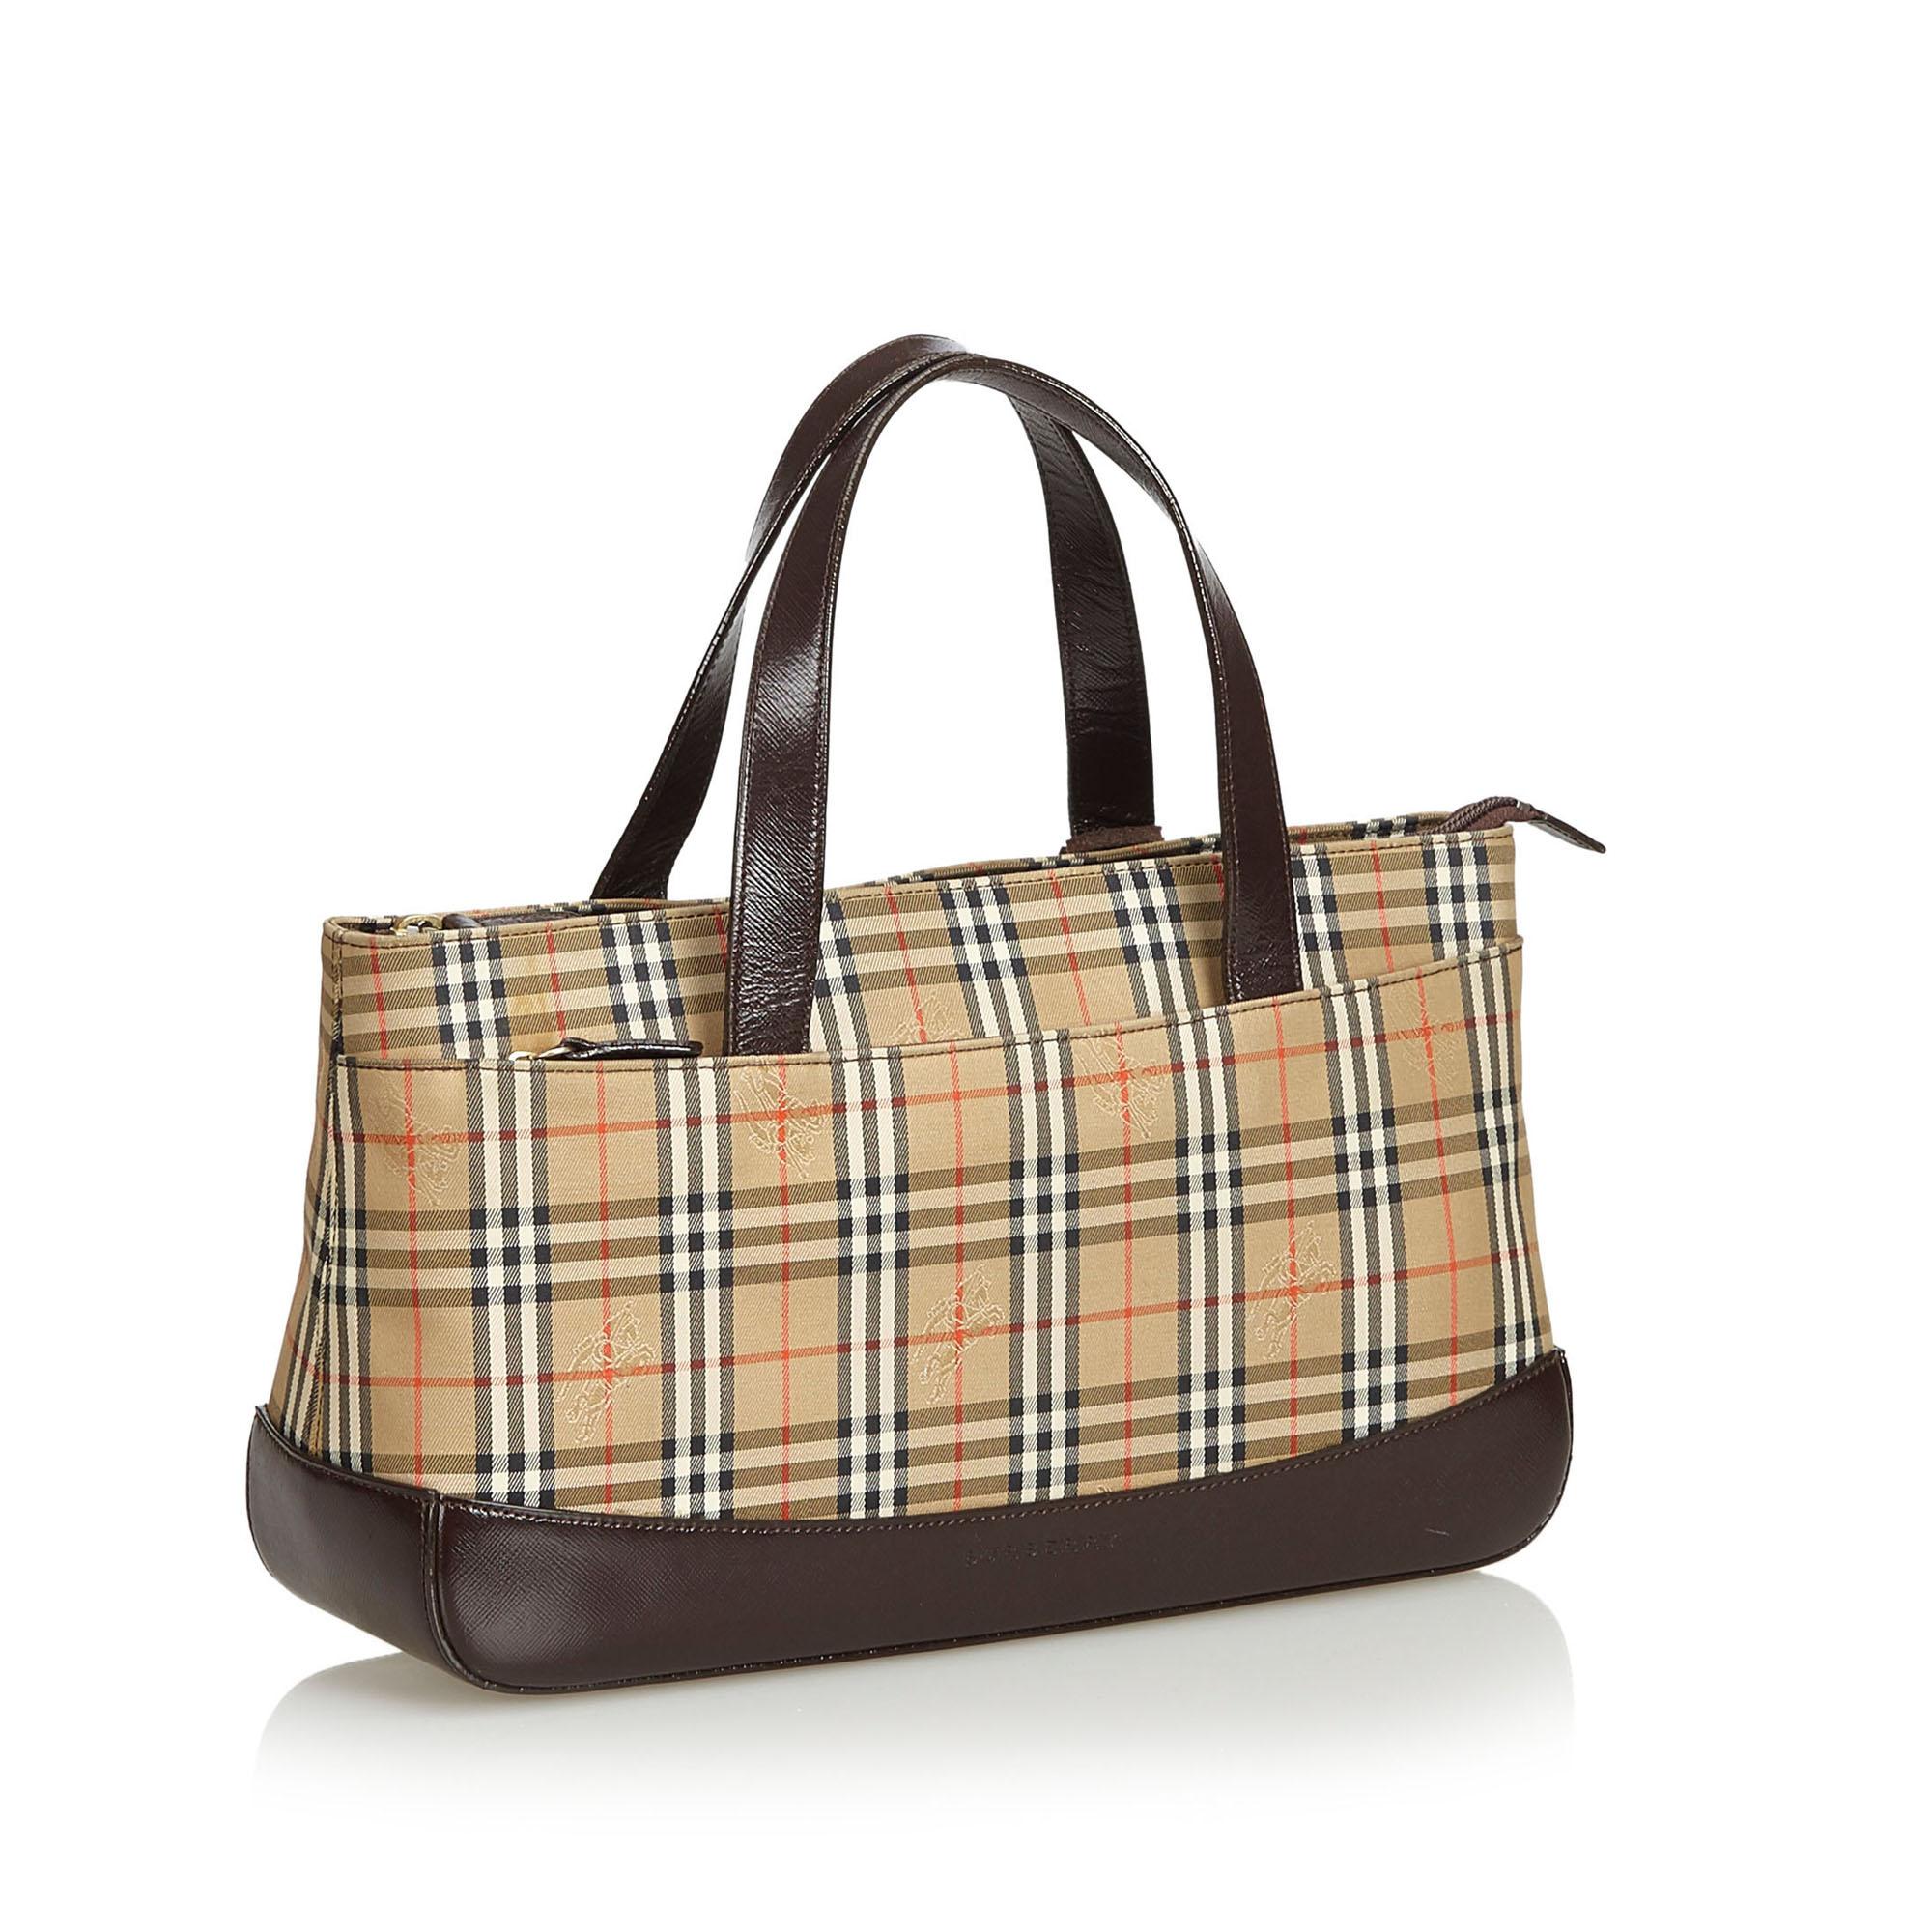 This handbag features a plaid nylon body with leather bottom, flat leather straps, open top, exterior slip pocket, and interior zip compartment and zip and slip pockets. It carries as AB condition rating.

Inclusions: 
This item does not come with